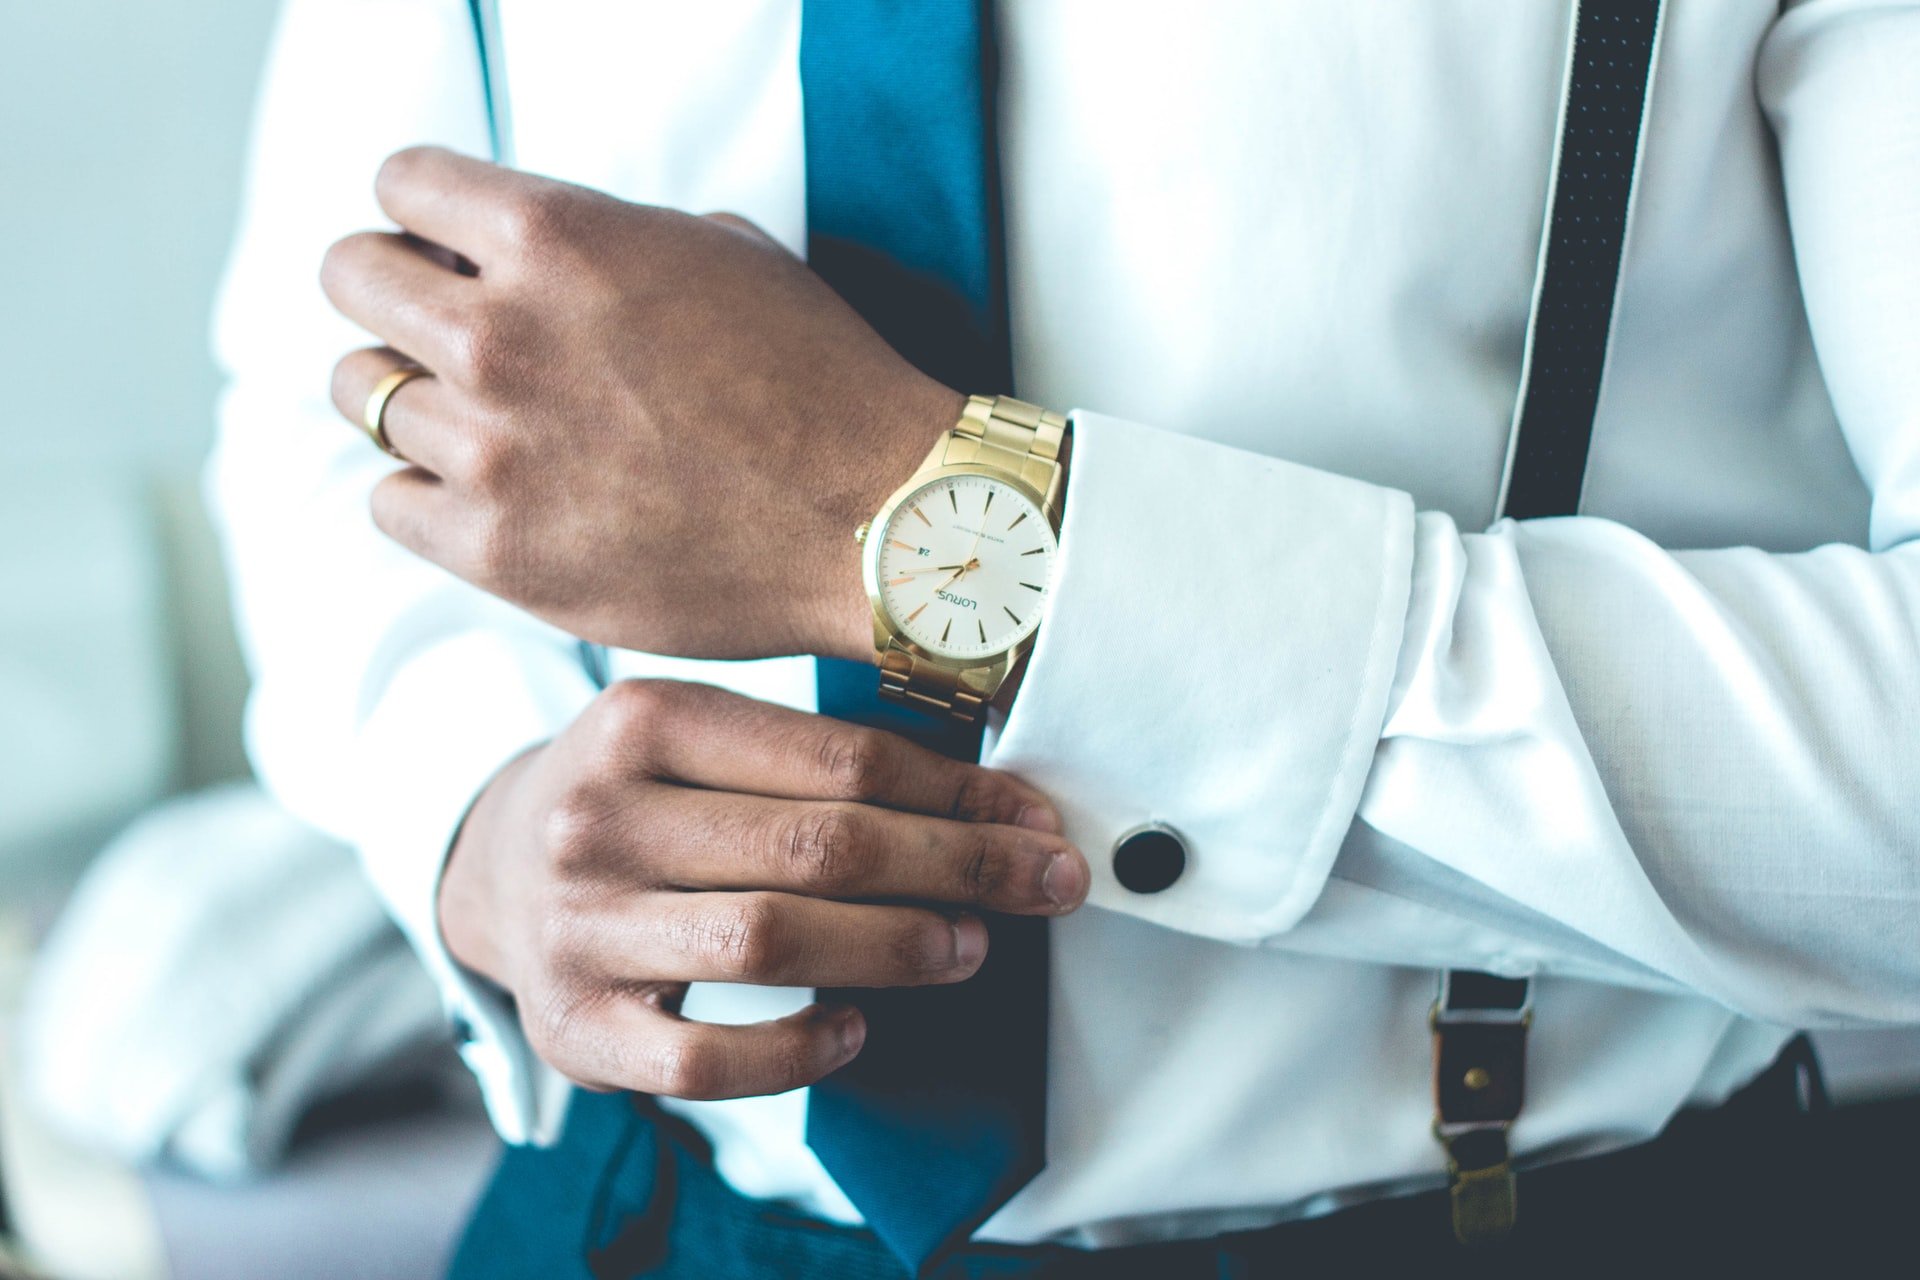 5 Dress Watches To Wear With a Suit